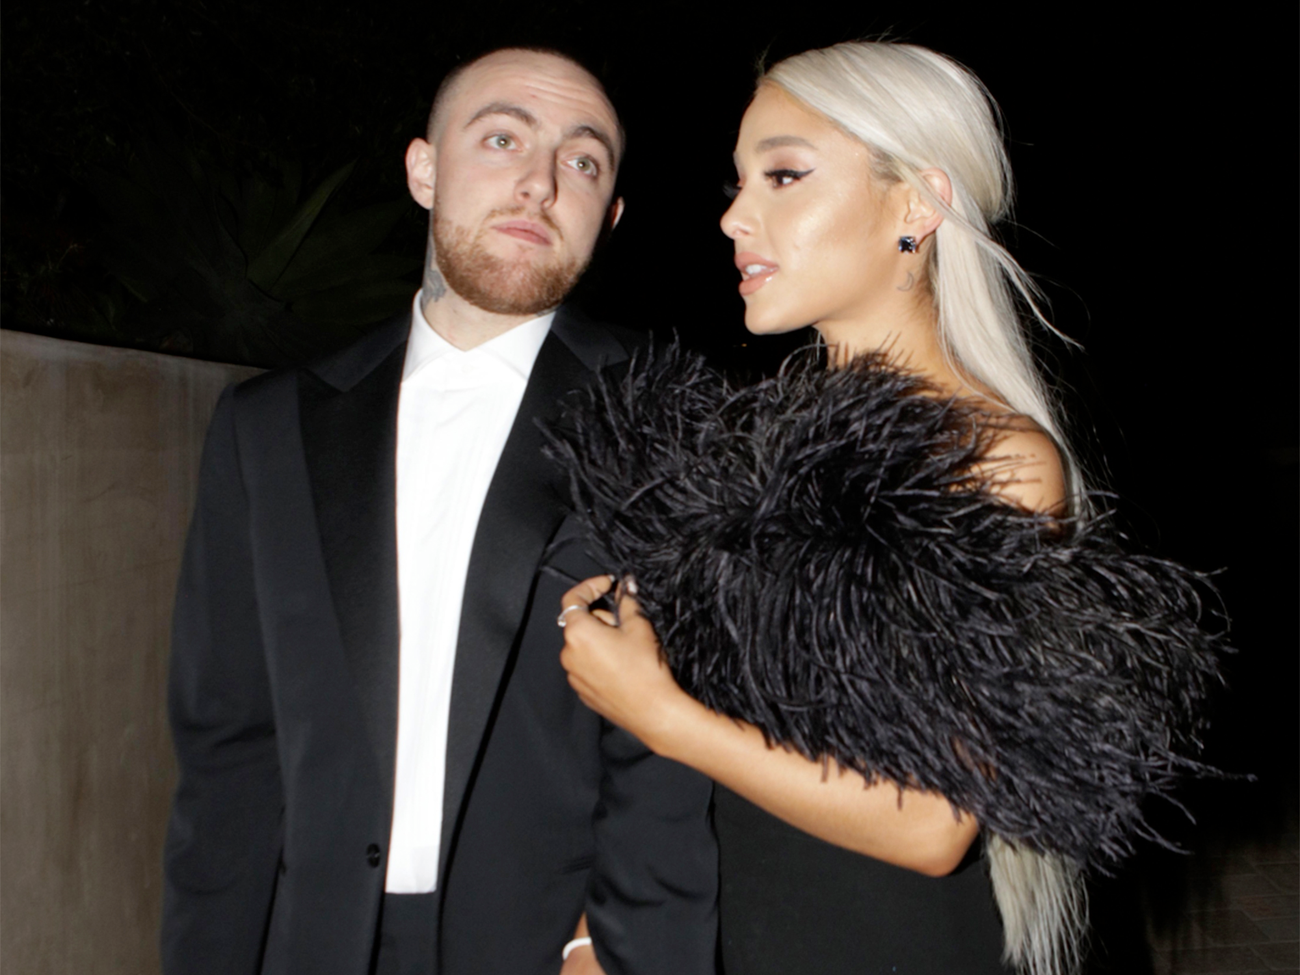 Mac Miller and Ariana Grande attending a 2018 Oscar party.  GC Images